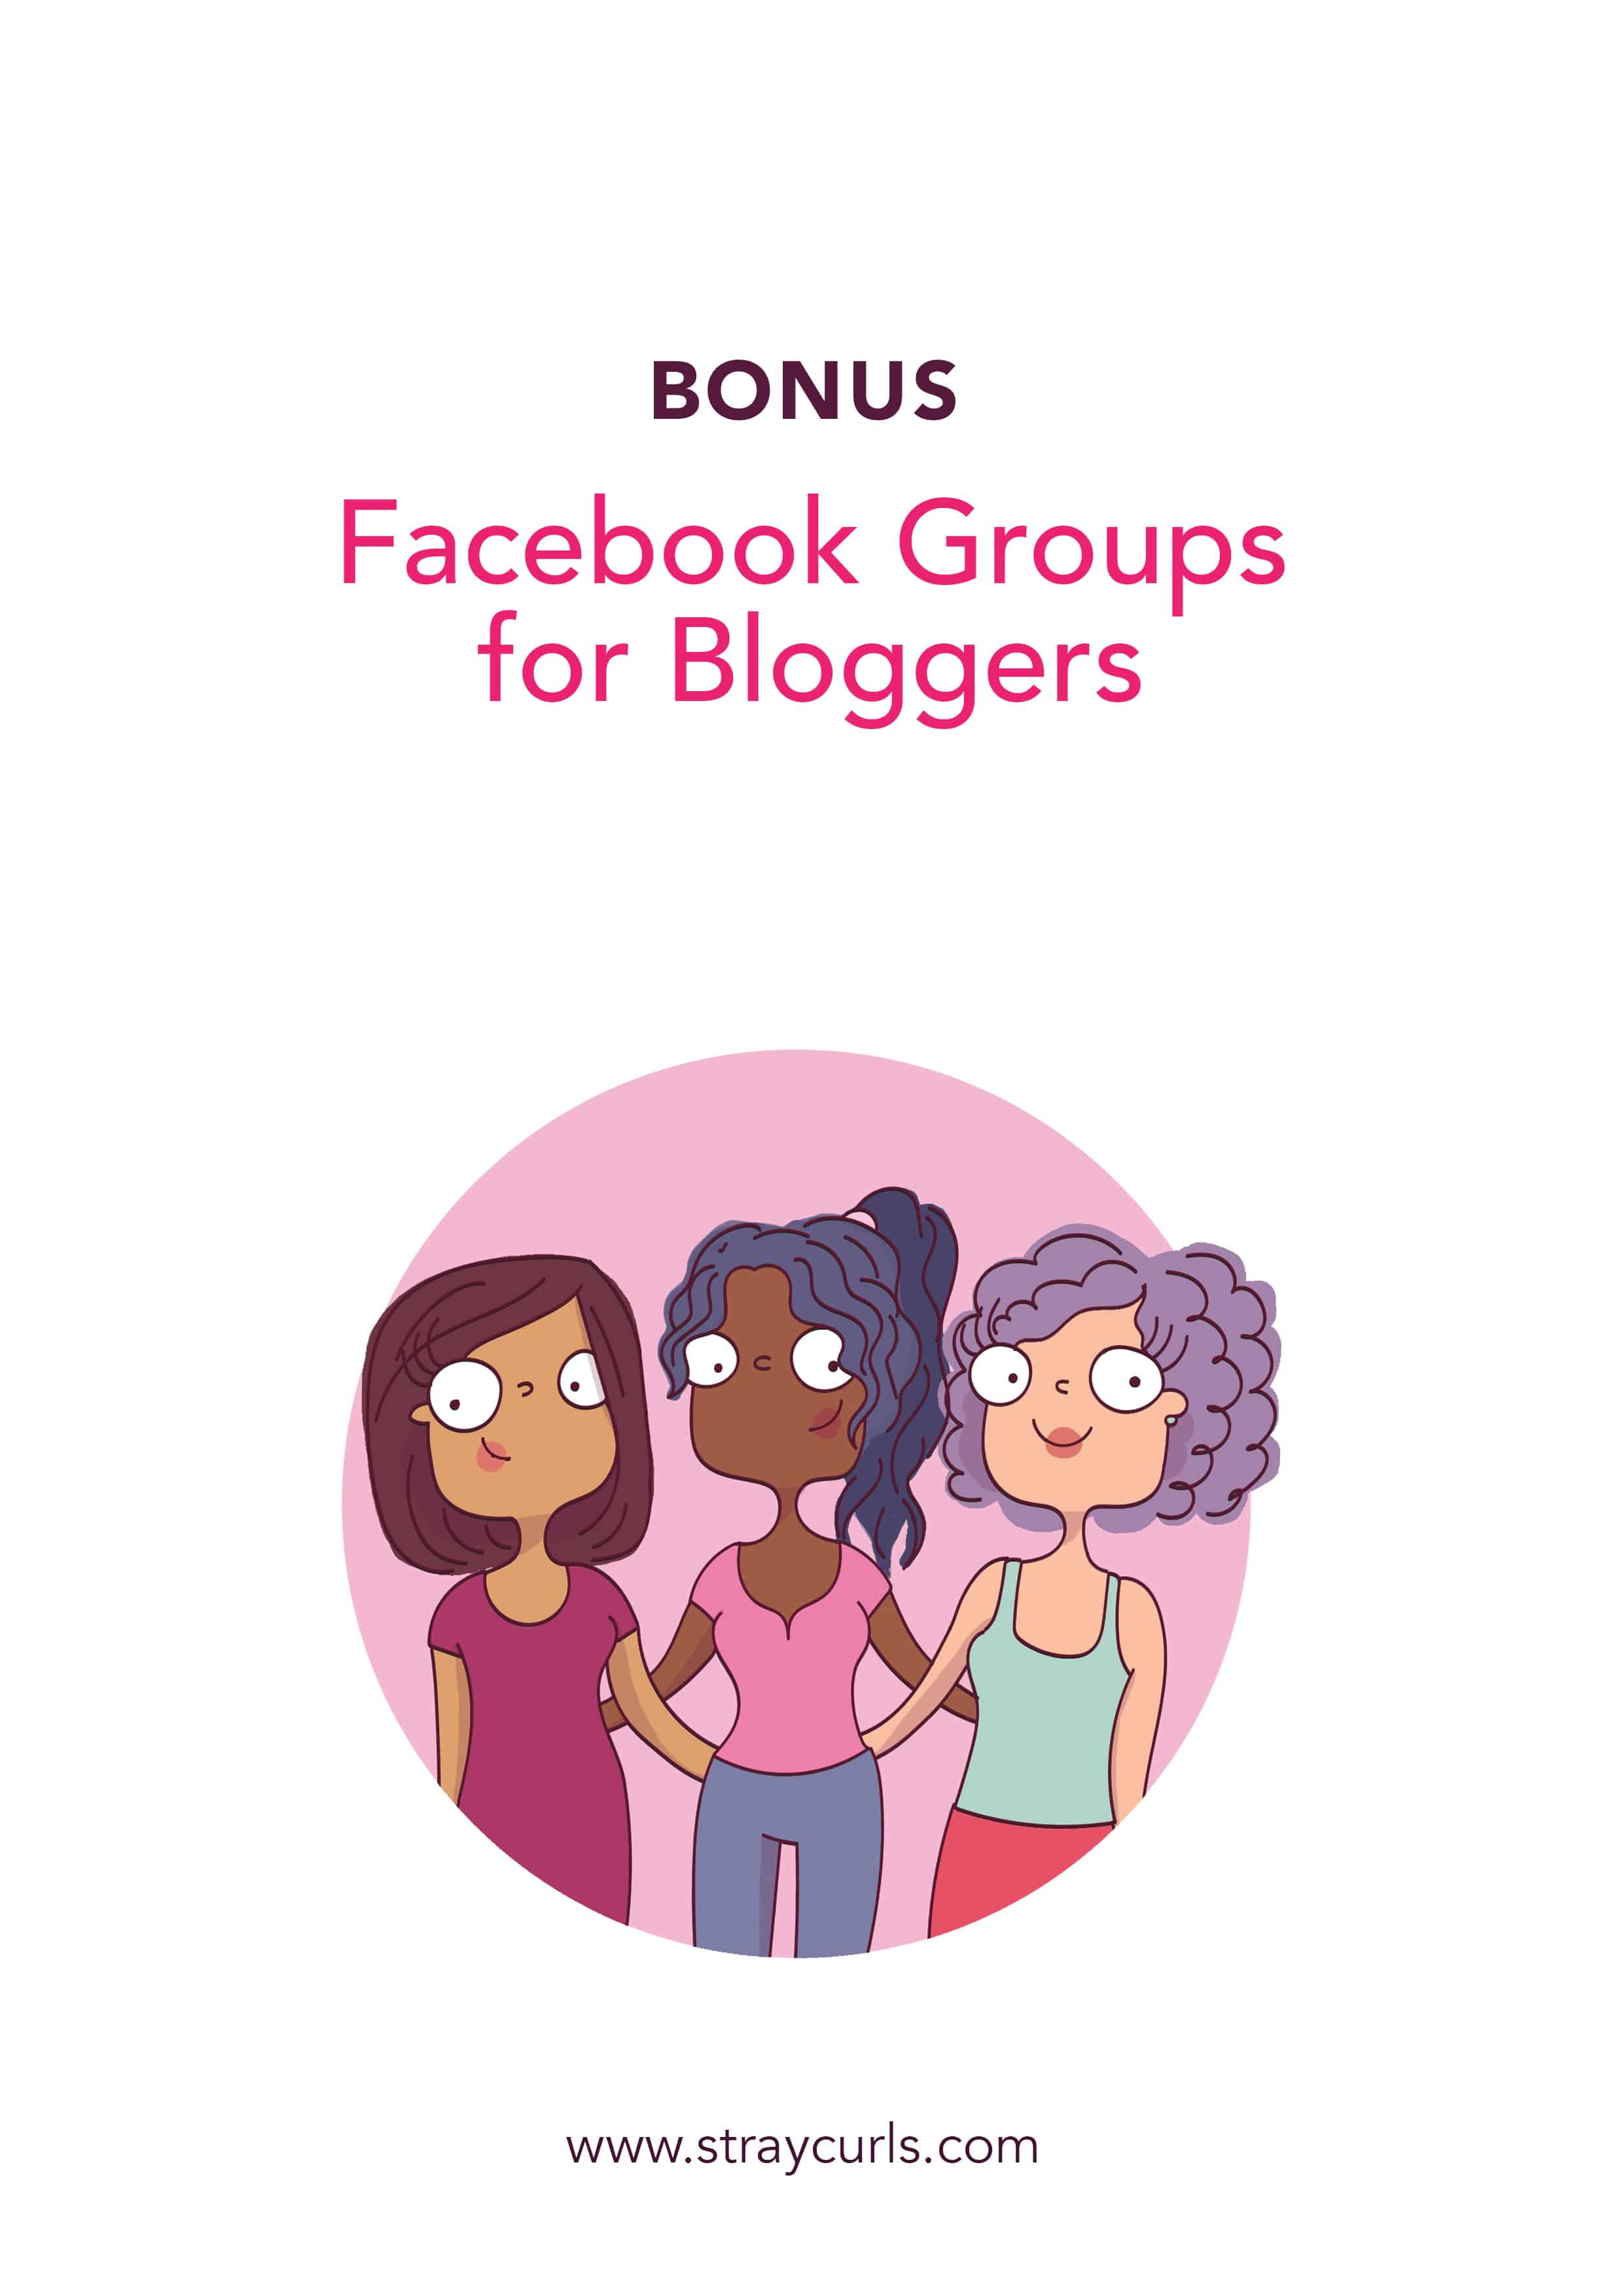 Facebook Groups for Bloggers so that you can engage with like minded people and grow your blog.